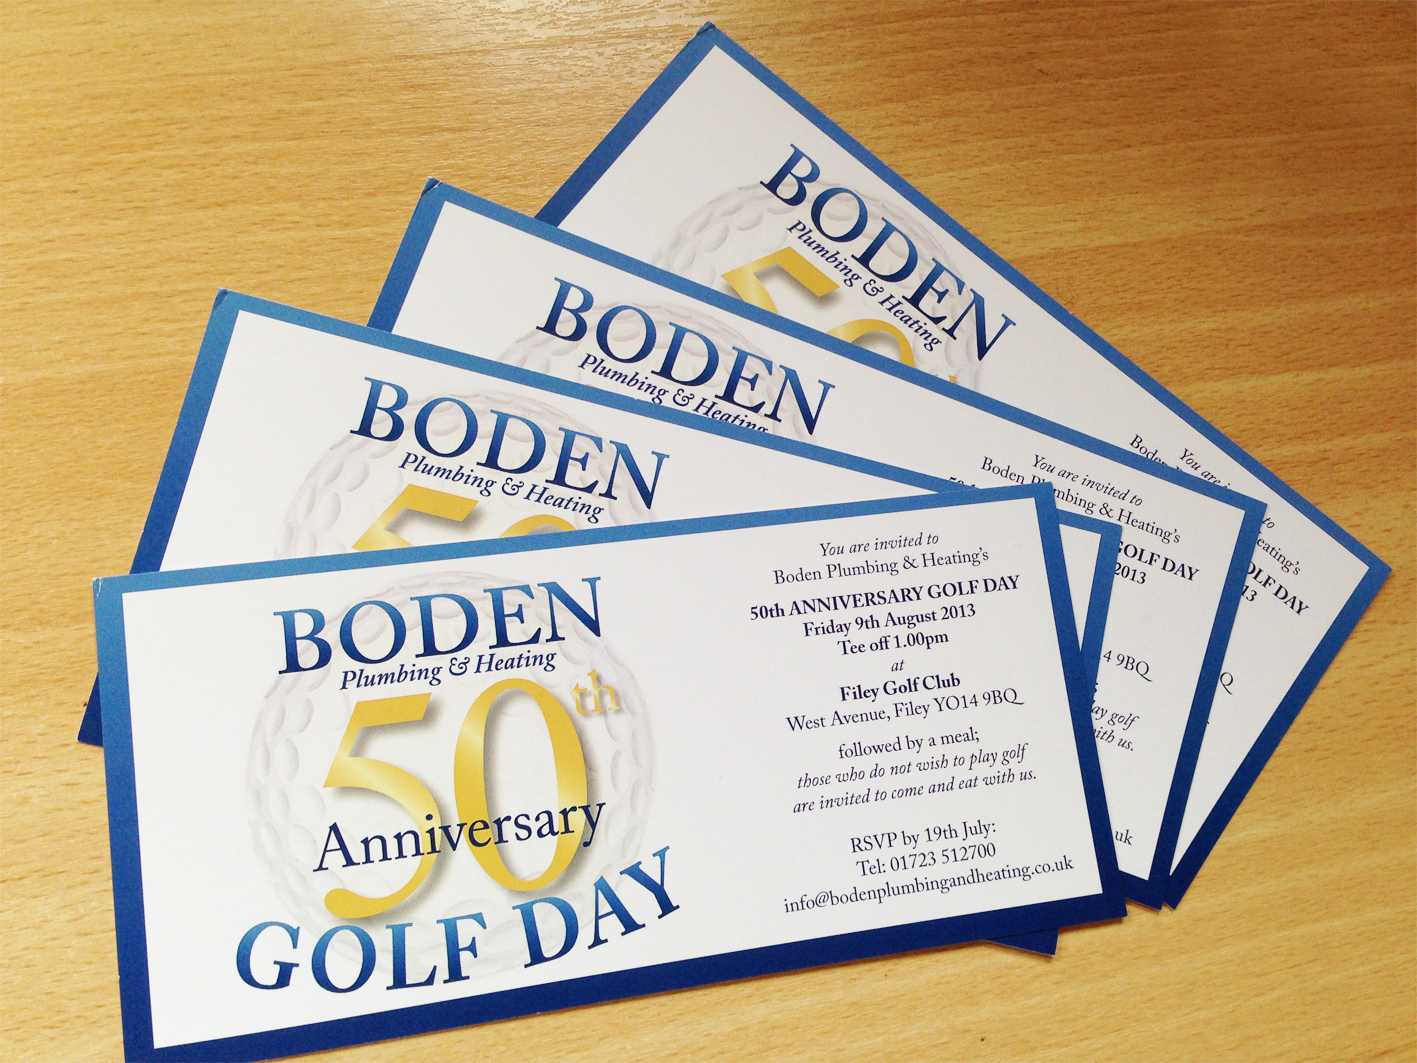 Golf Day Corporate Invitations designed by The Smart Station